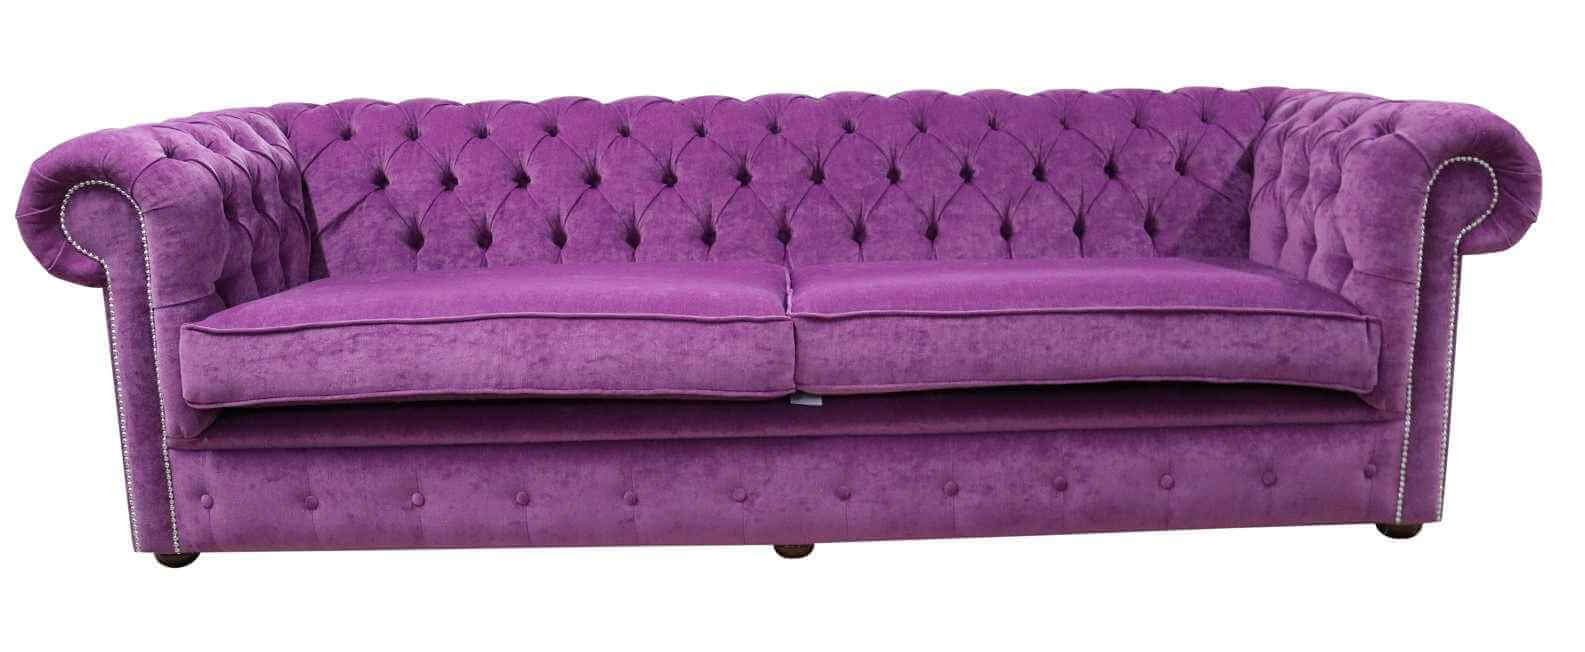 Available Now Quality Chesterfield Couches for Sale  %Post Title